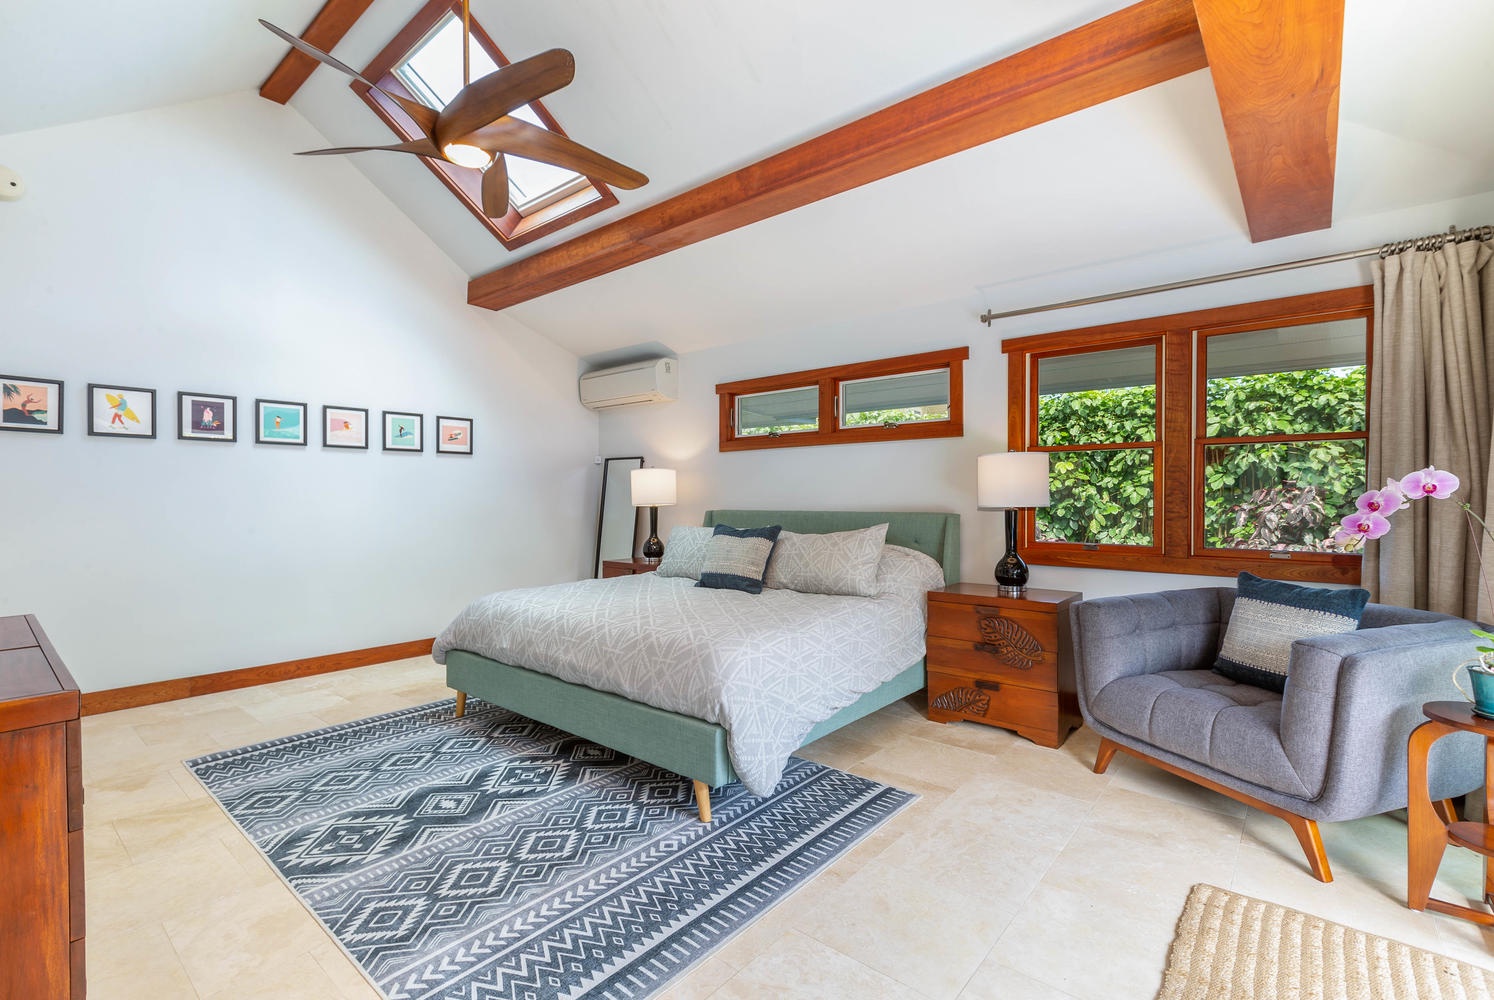 Princeville Vacation Rentals, Makana Lei - Primary bedroom has high ceilings and plenty of space